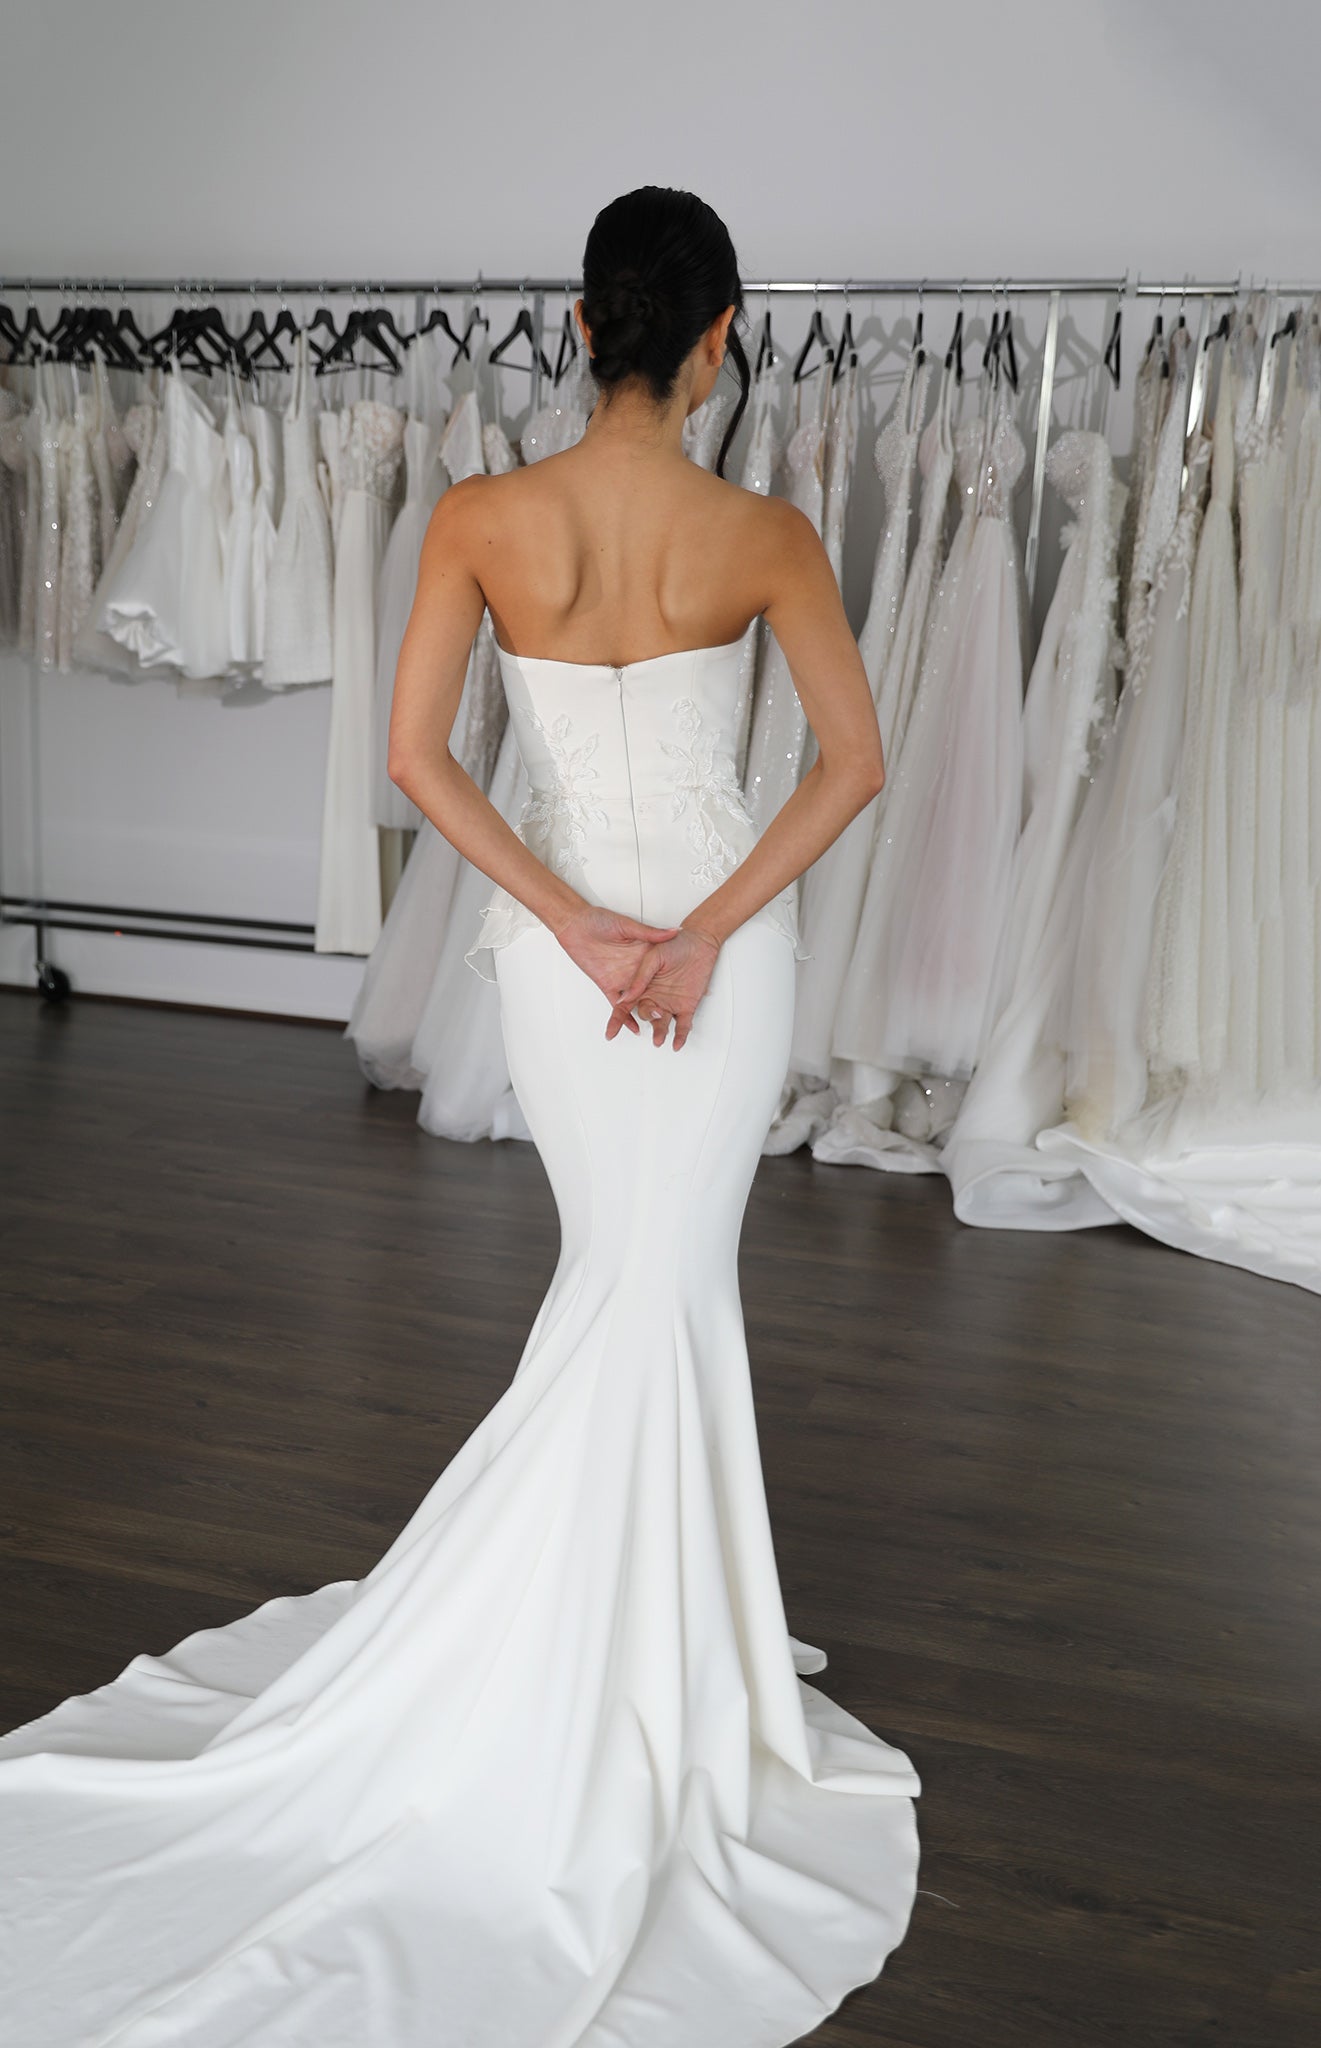 woman with hands behind her back in wedding dress